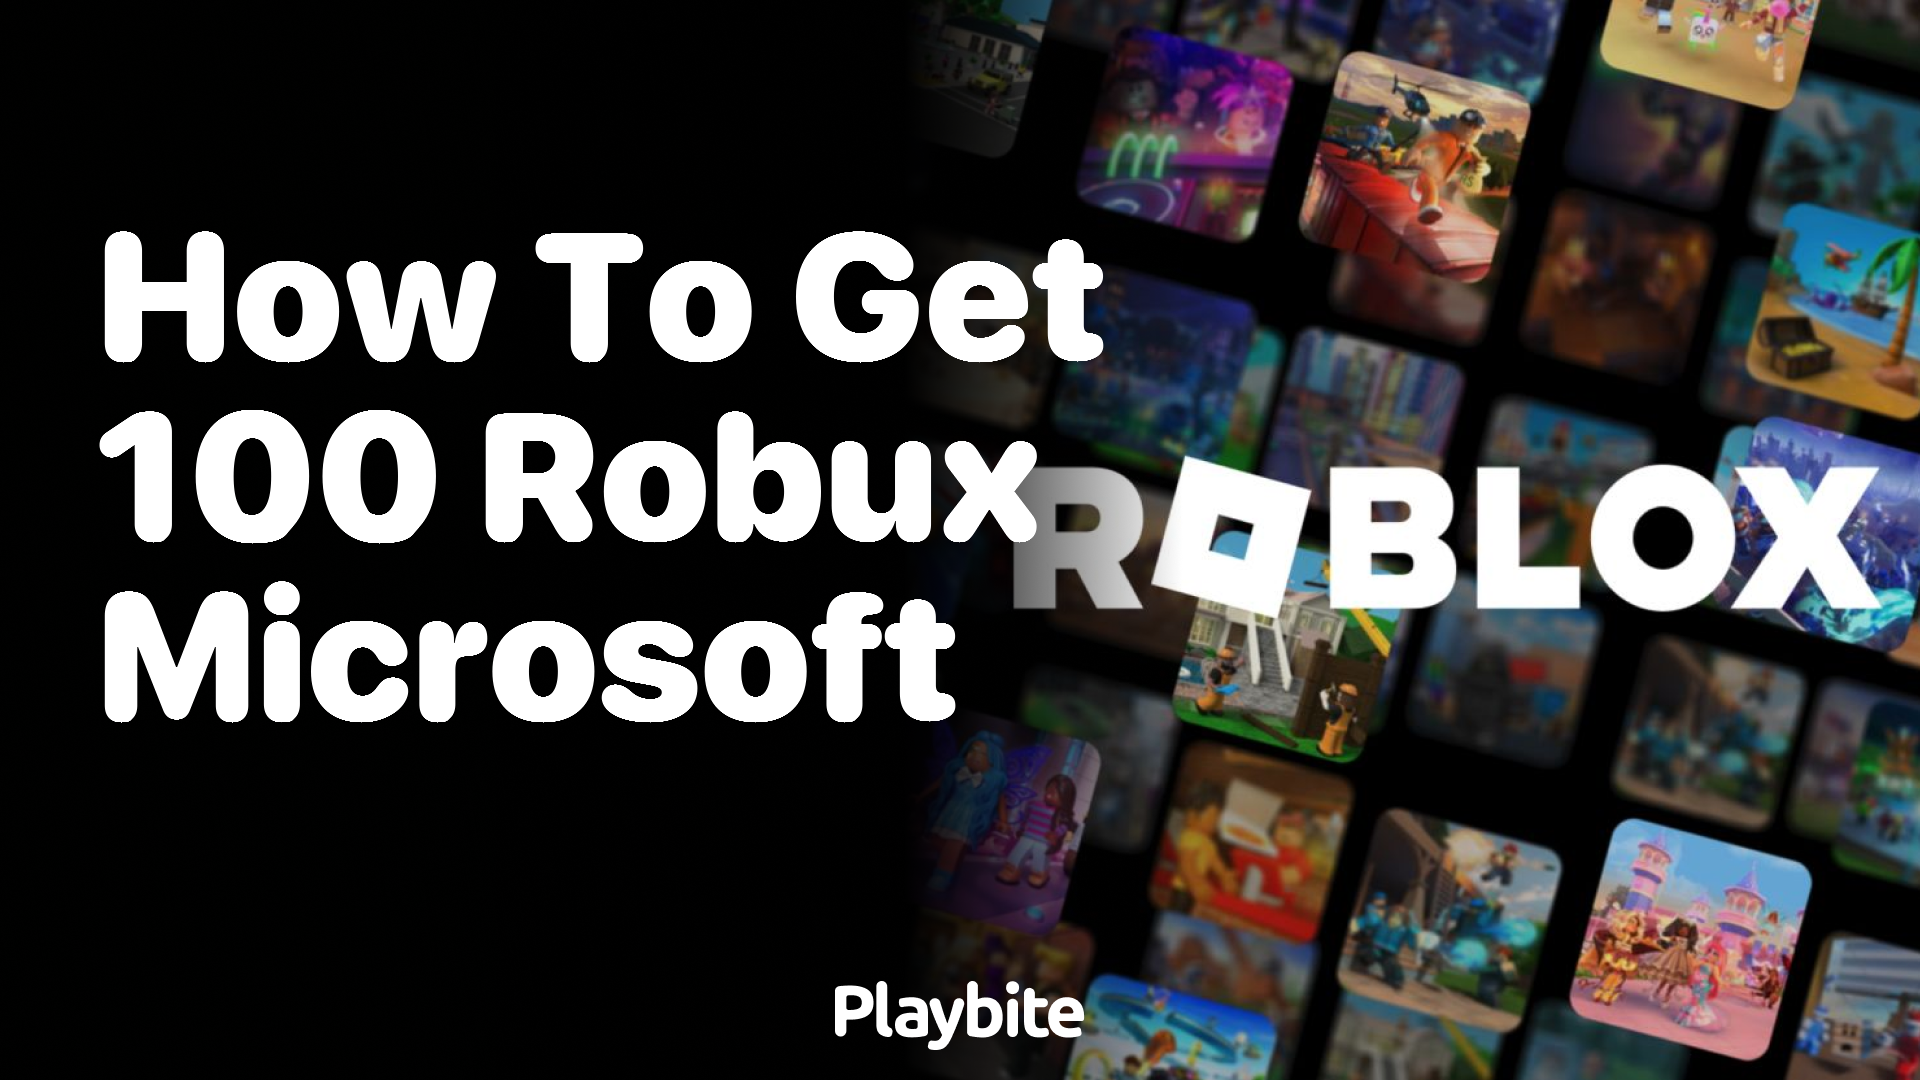 How to Get 100 Robux with Microsoft Rewards